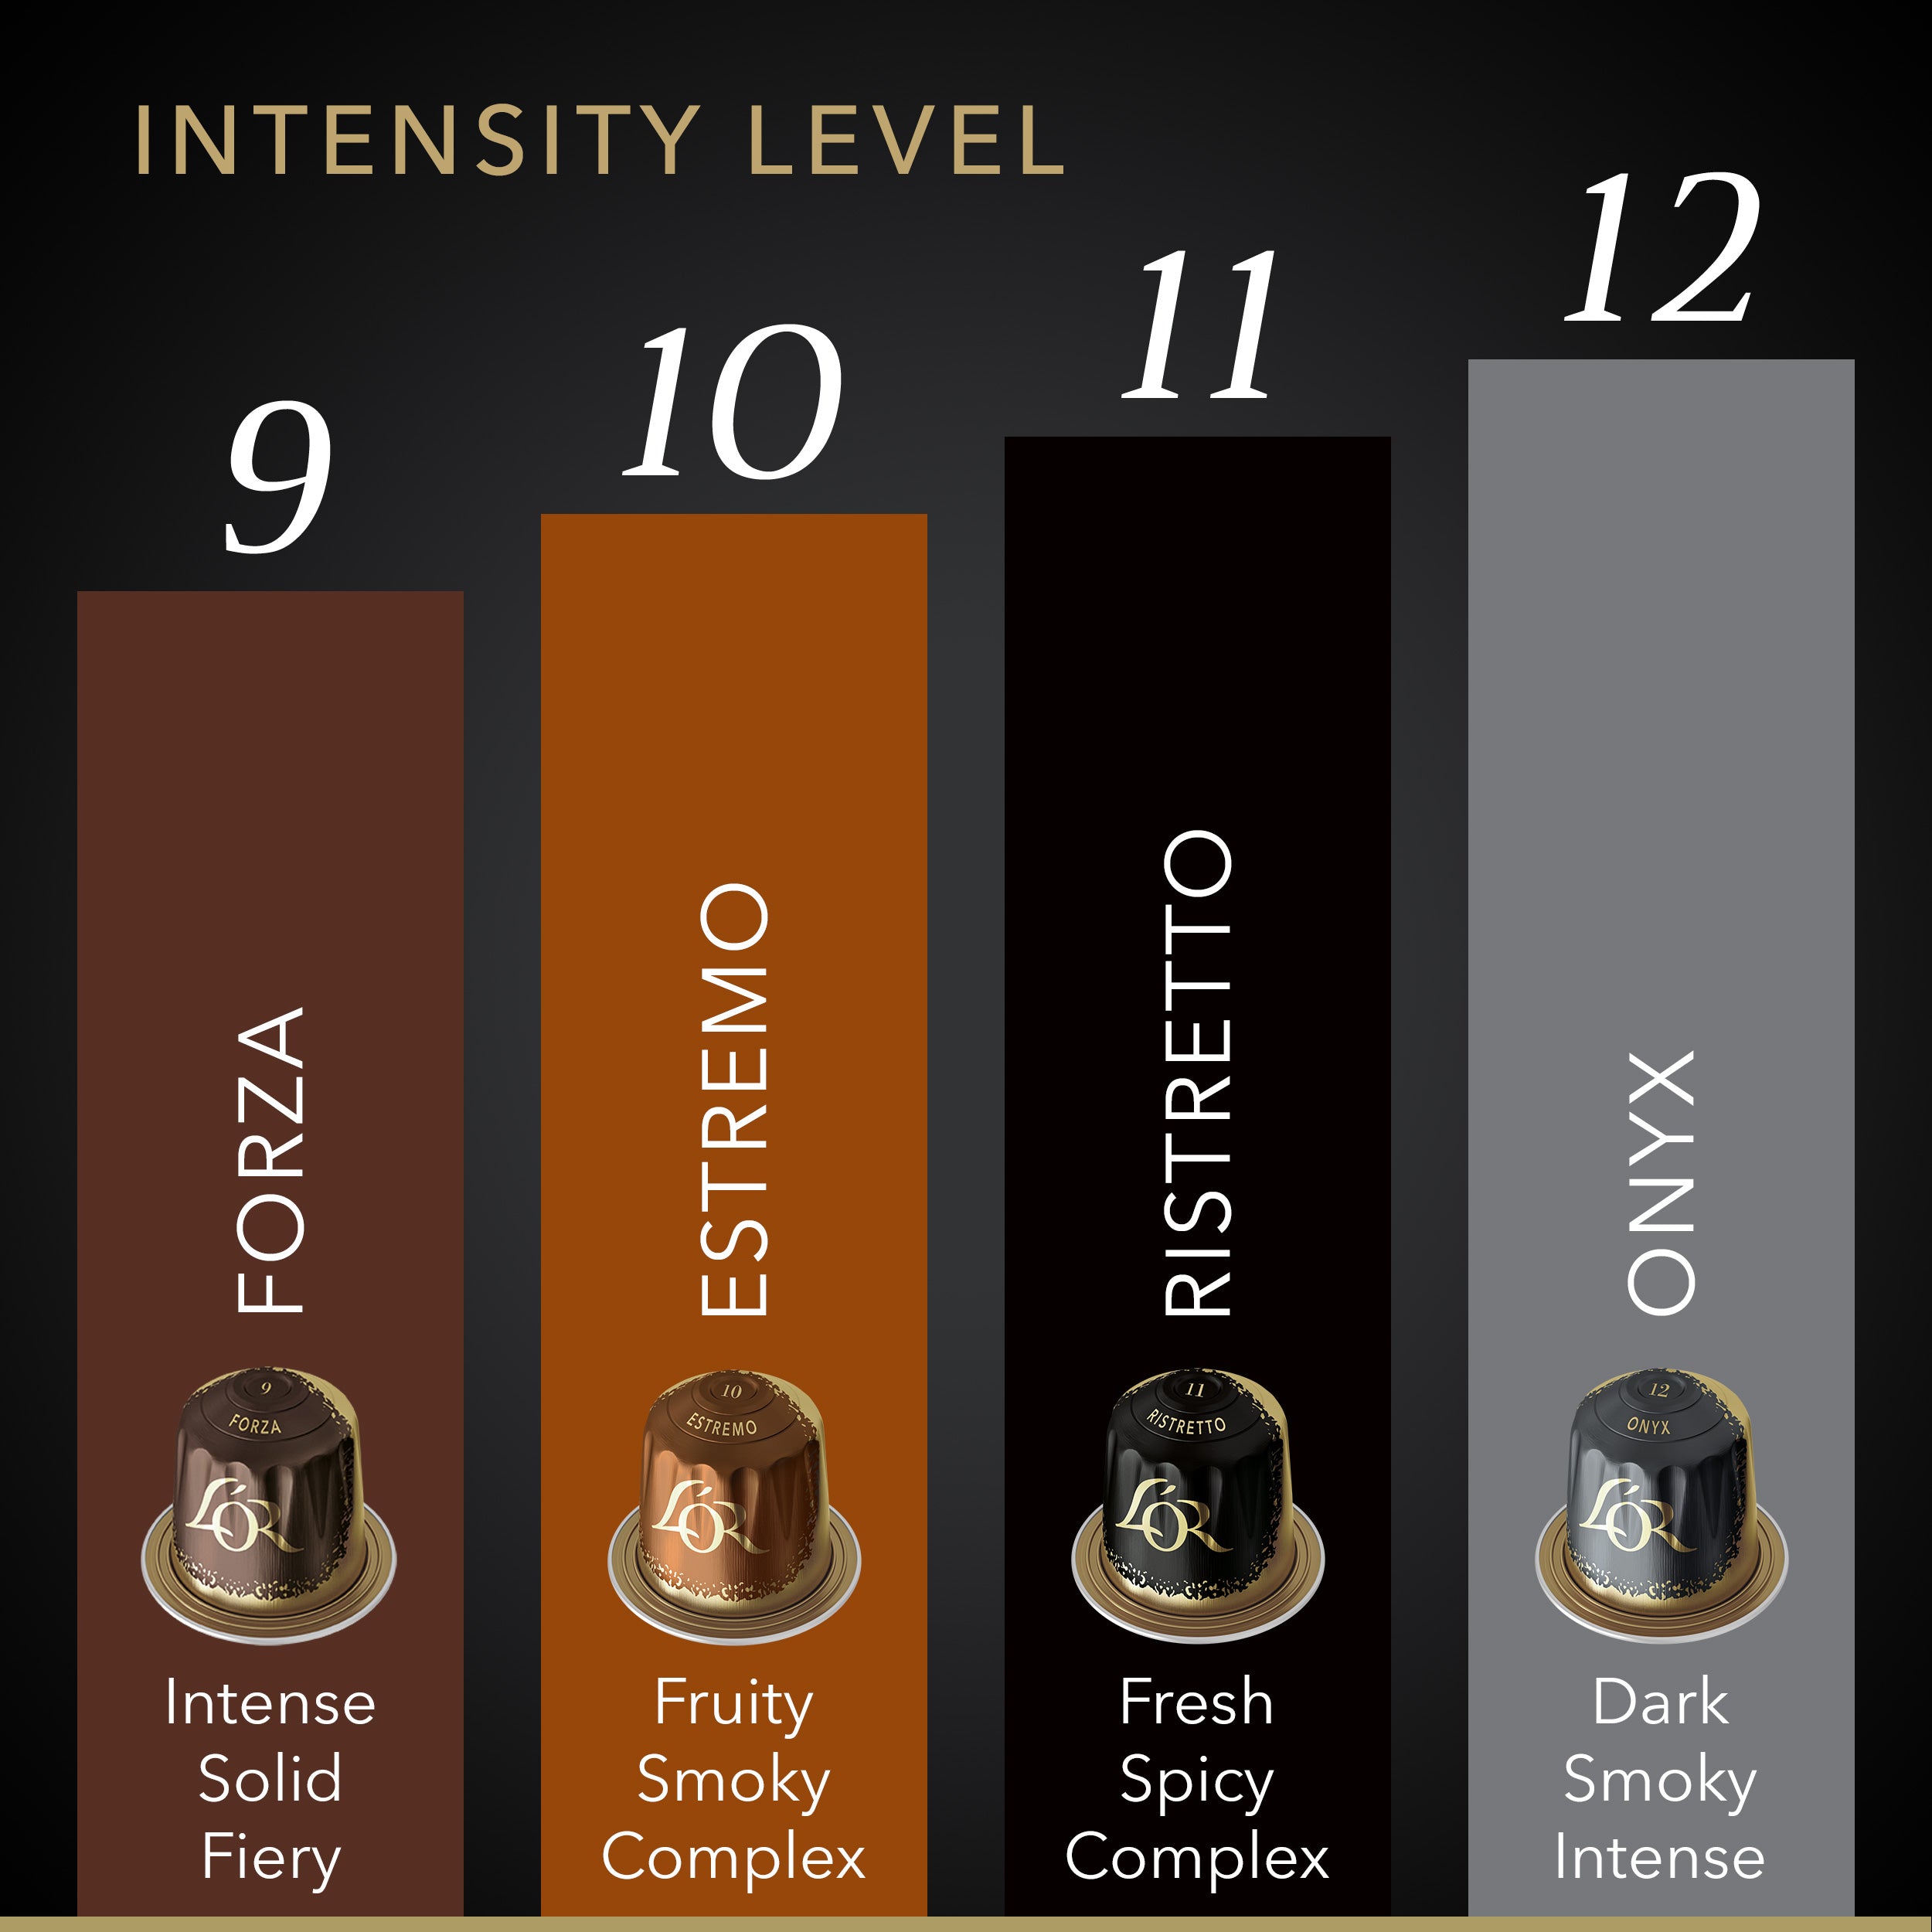 Image of intensity levels included. 